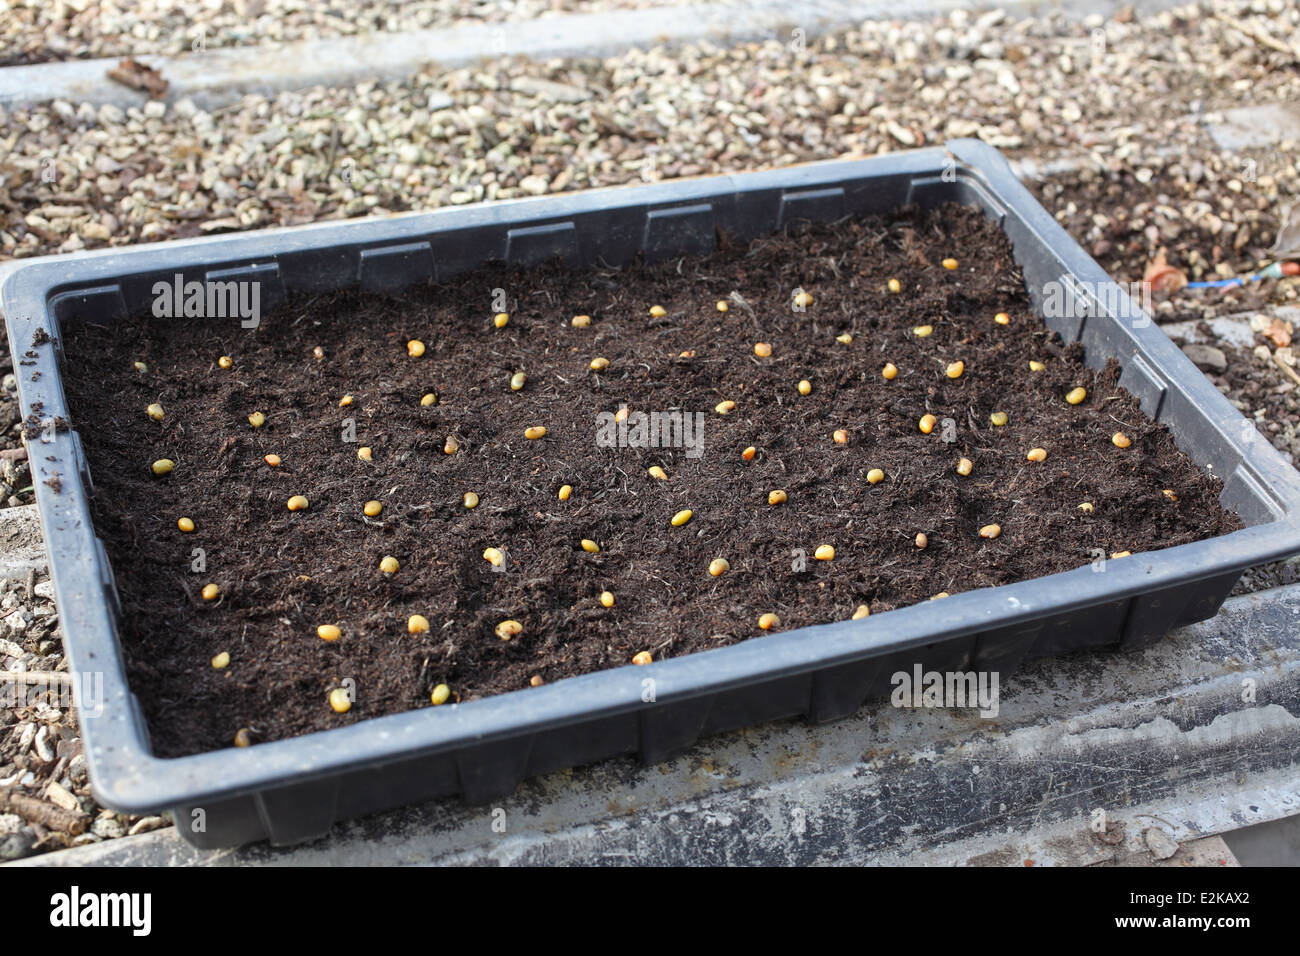 Growing Laburnum trees step7 lay out seeds about 30mm apart in seed tray Stock Photo